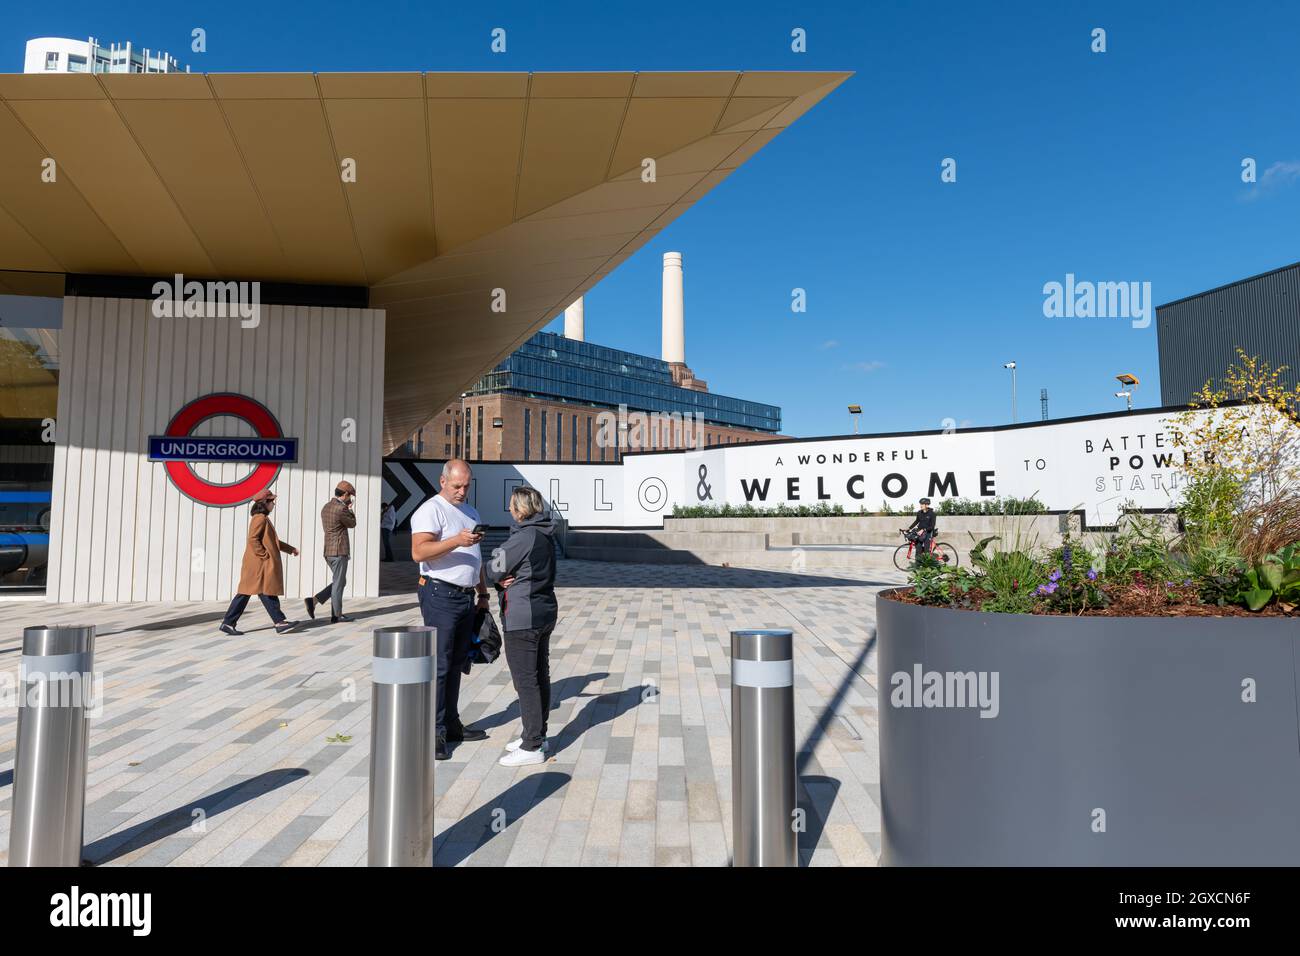 London. UK. 10.03.2021. Exterior view of Battersea Power Station, one of two new London Underground station on the Northern Line. Stock Photo